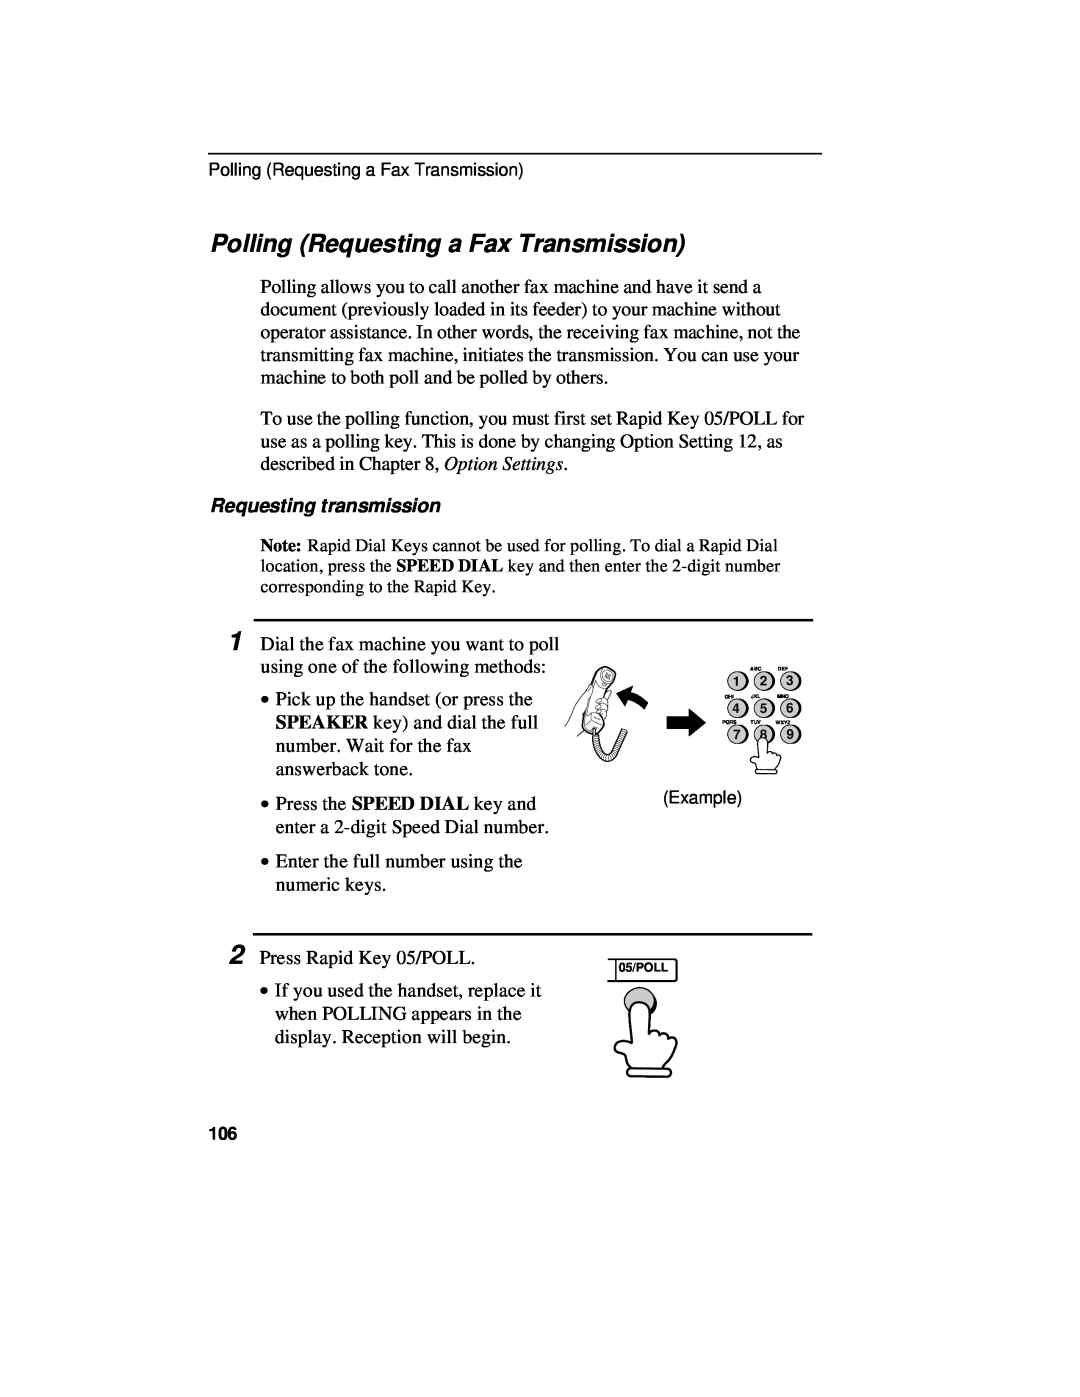 Sharp UX-460 operation manual Polling Requesting a Fax Transmission, Requesting transmission 